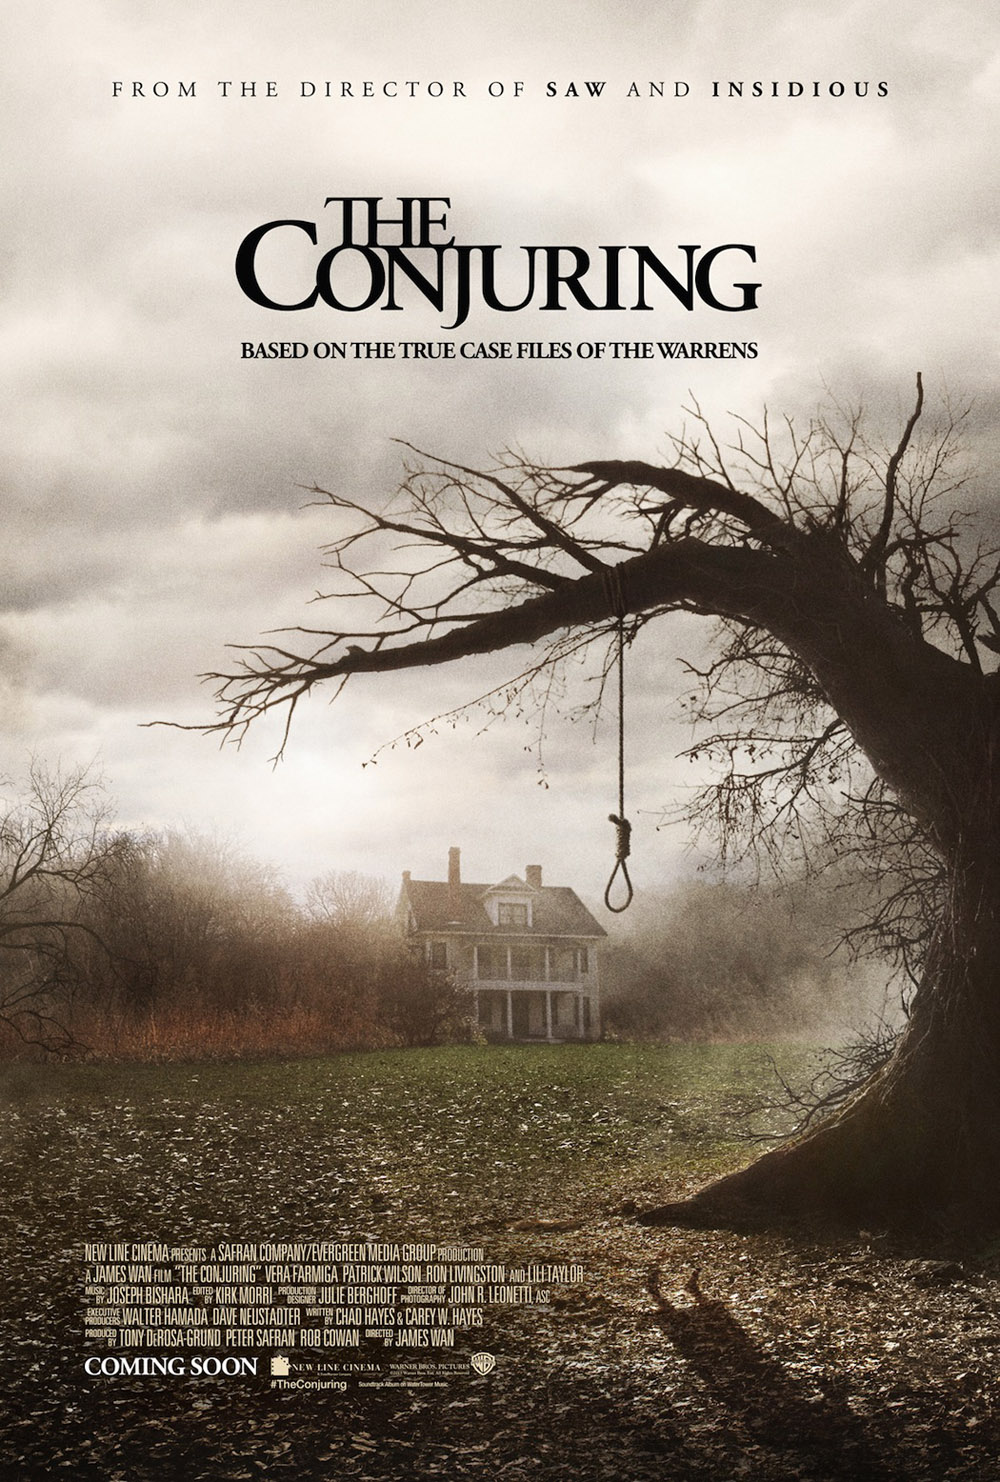 2.The Conjuring